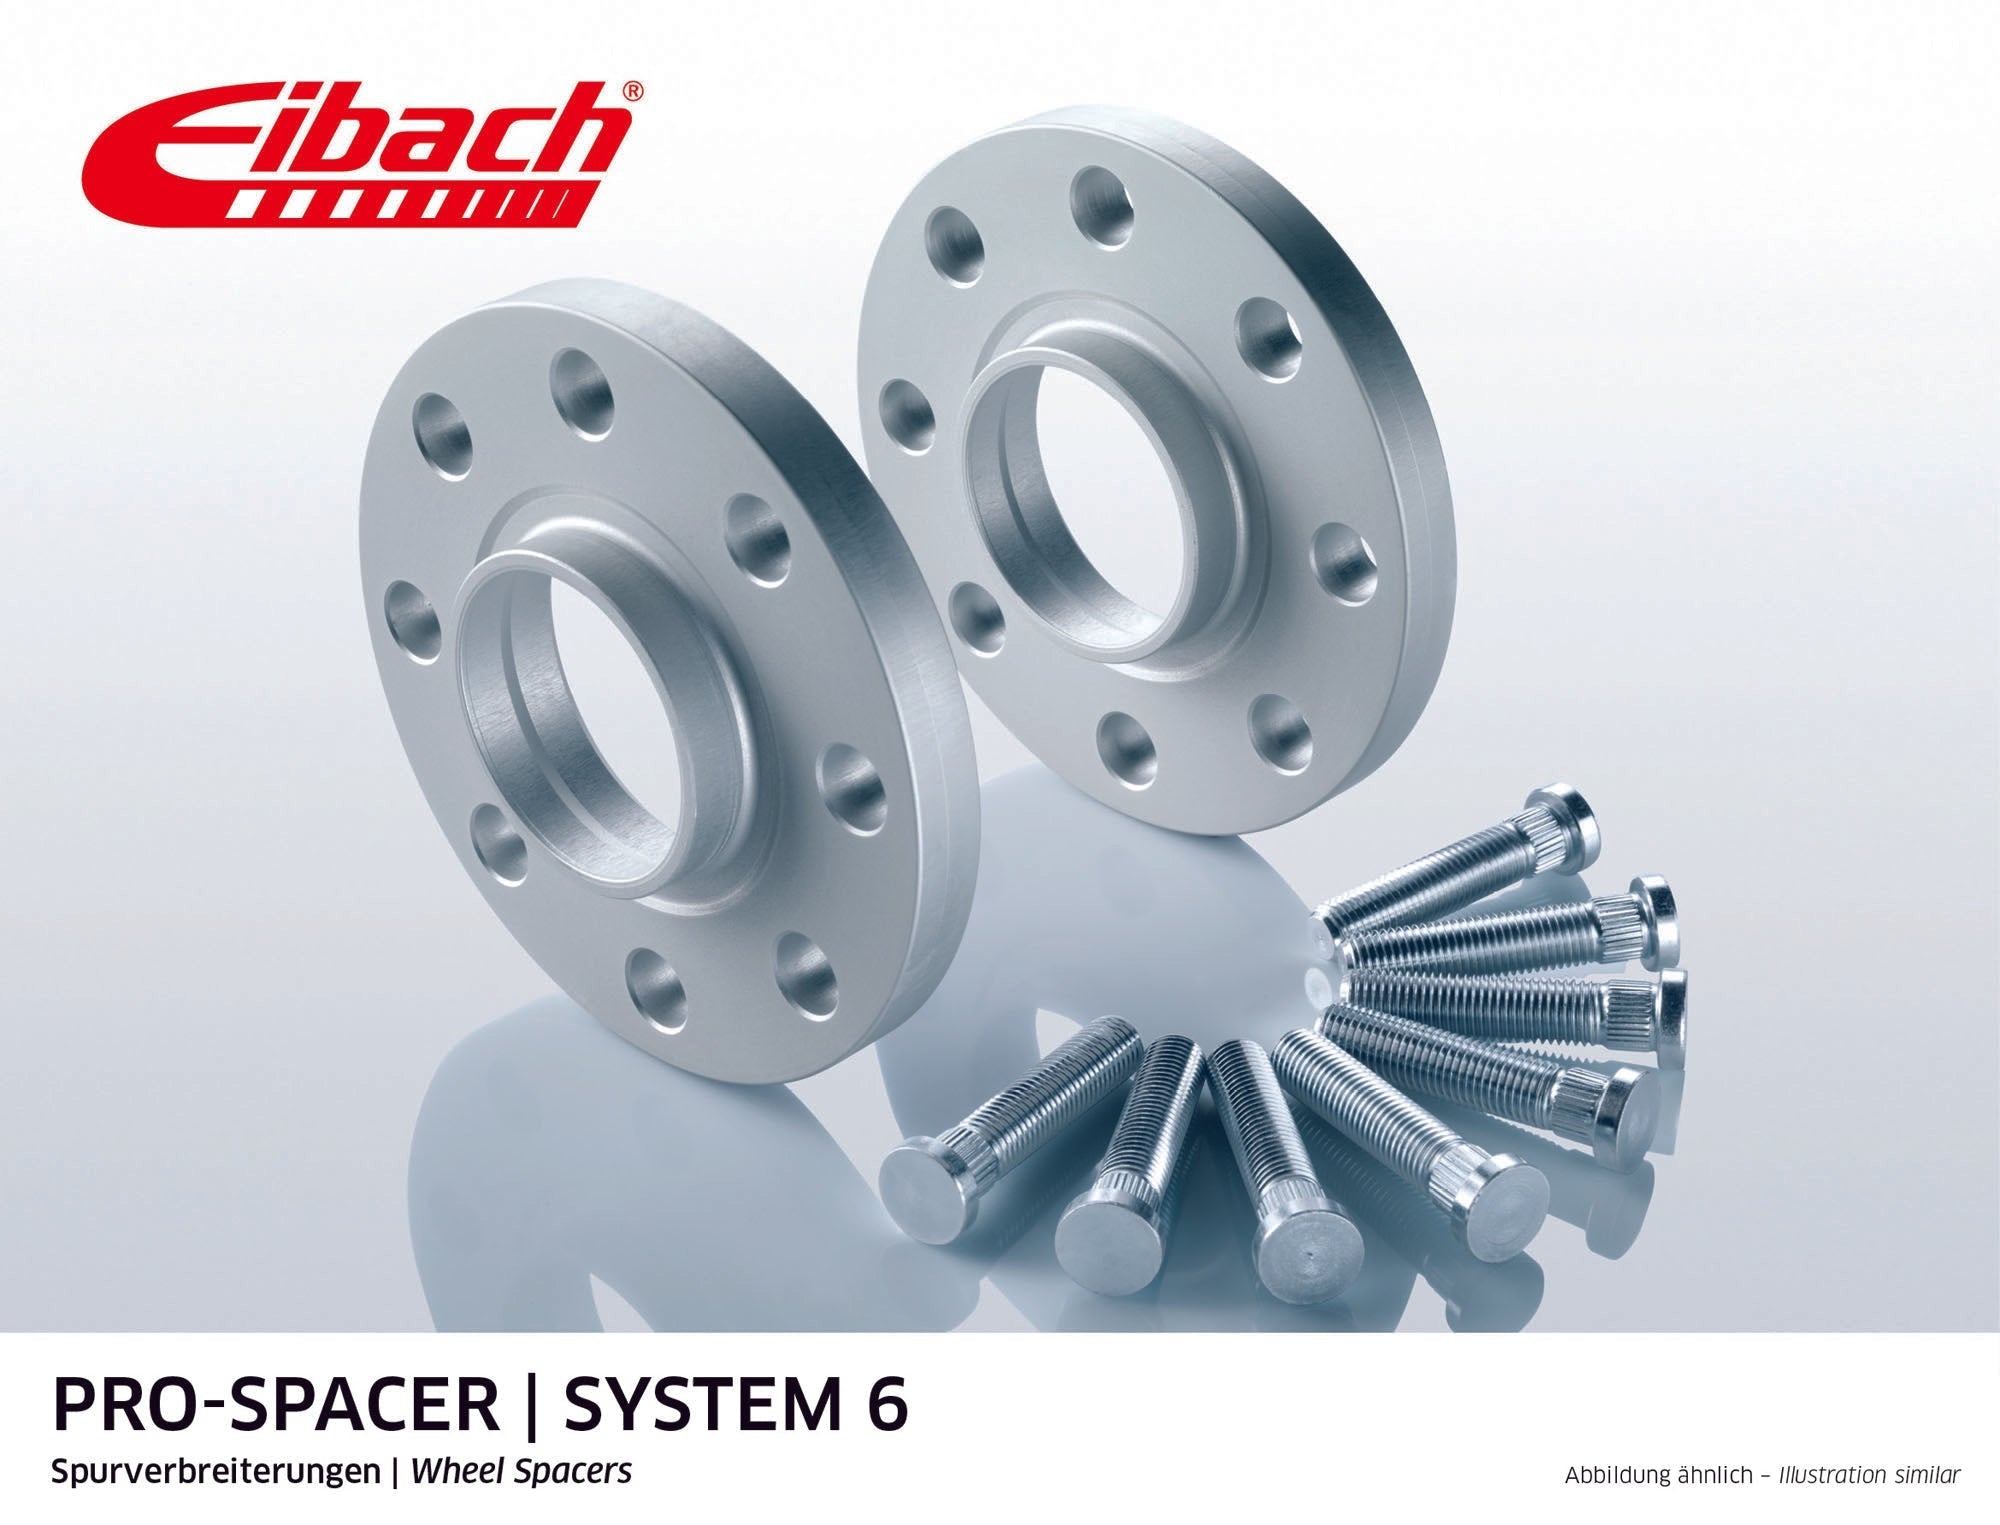 Eibach 7mm Pro-Spacer - Silver Anodized Wheel Spacer 944 1981-91 #S90-6-07-001